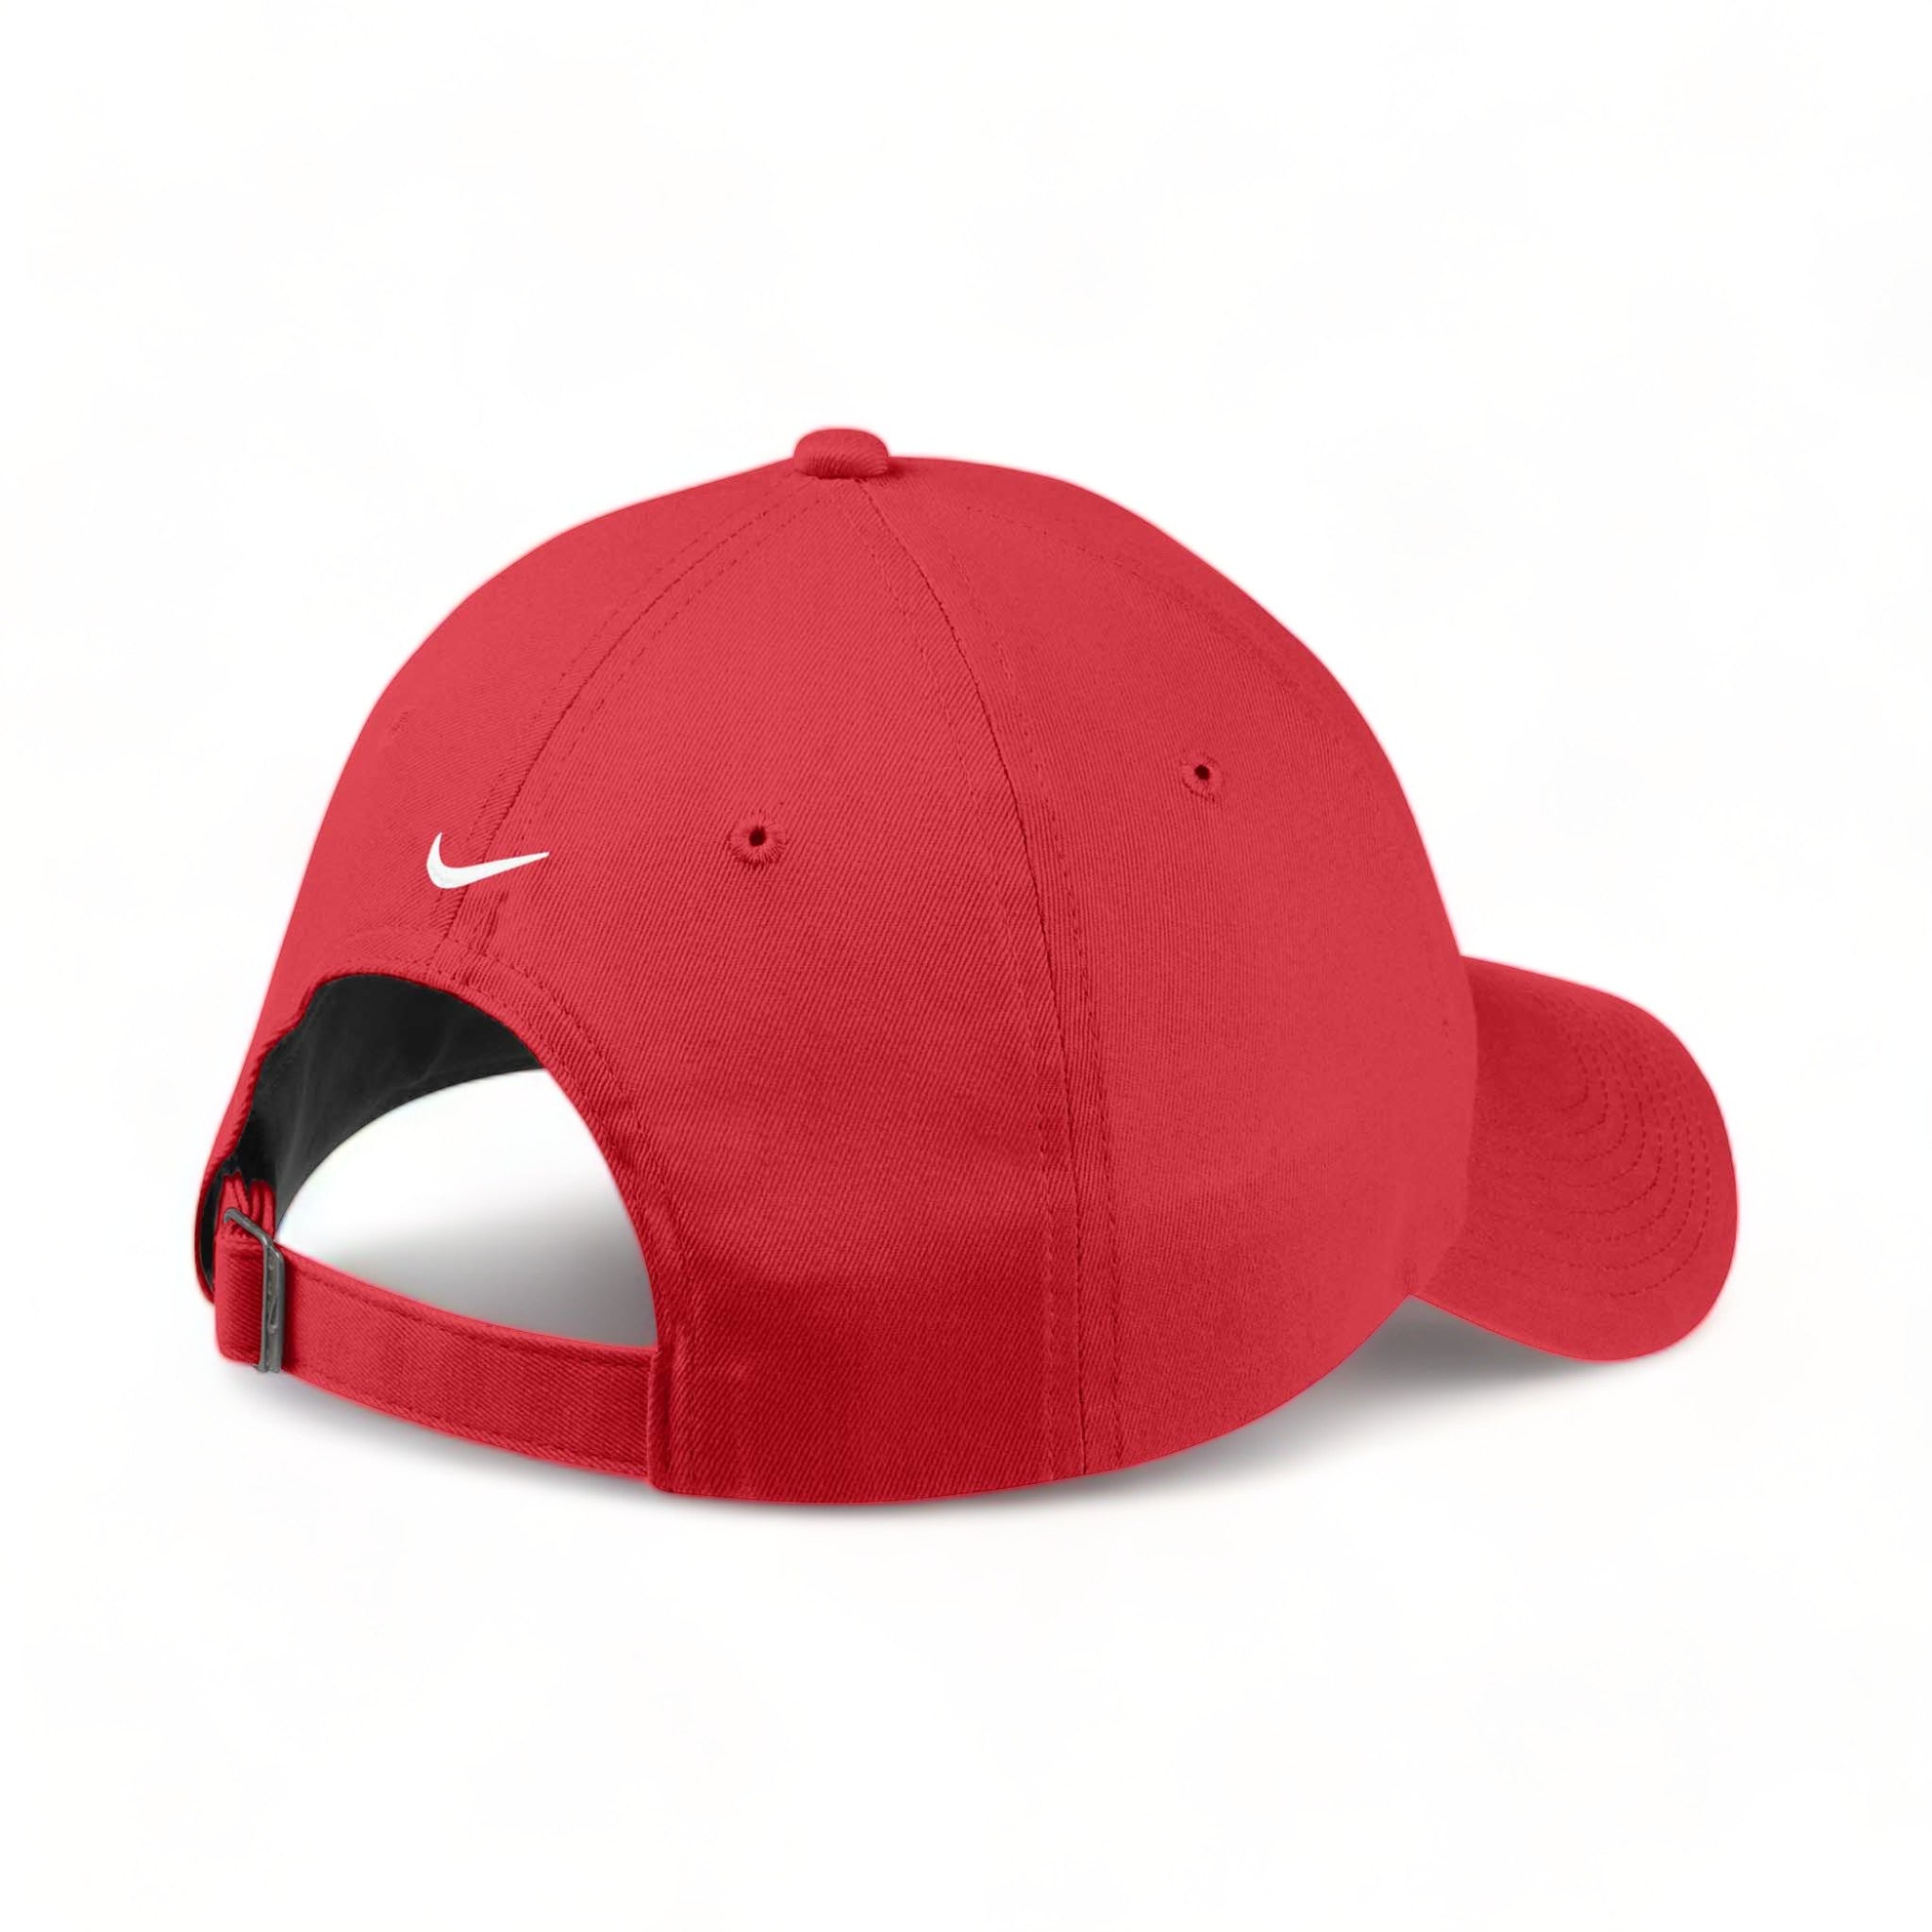 Back view of Nike NKFB6449 custom hat in gym red